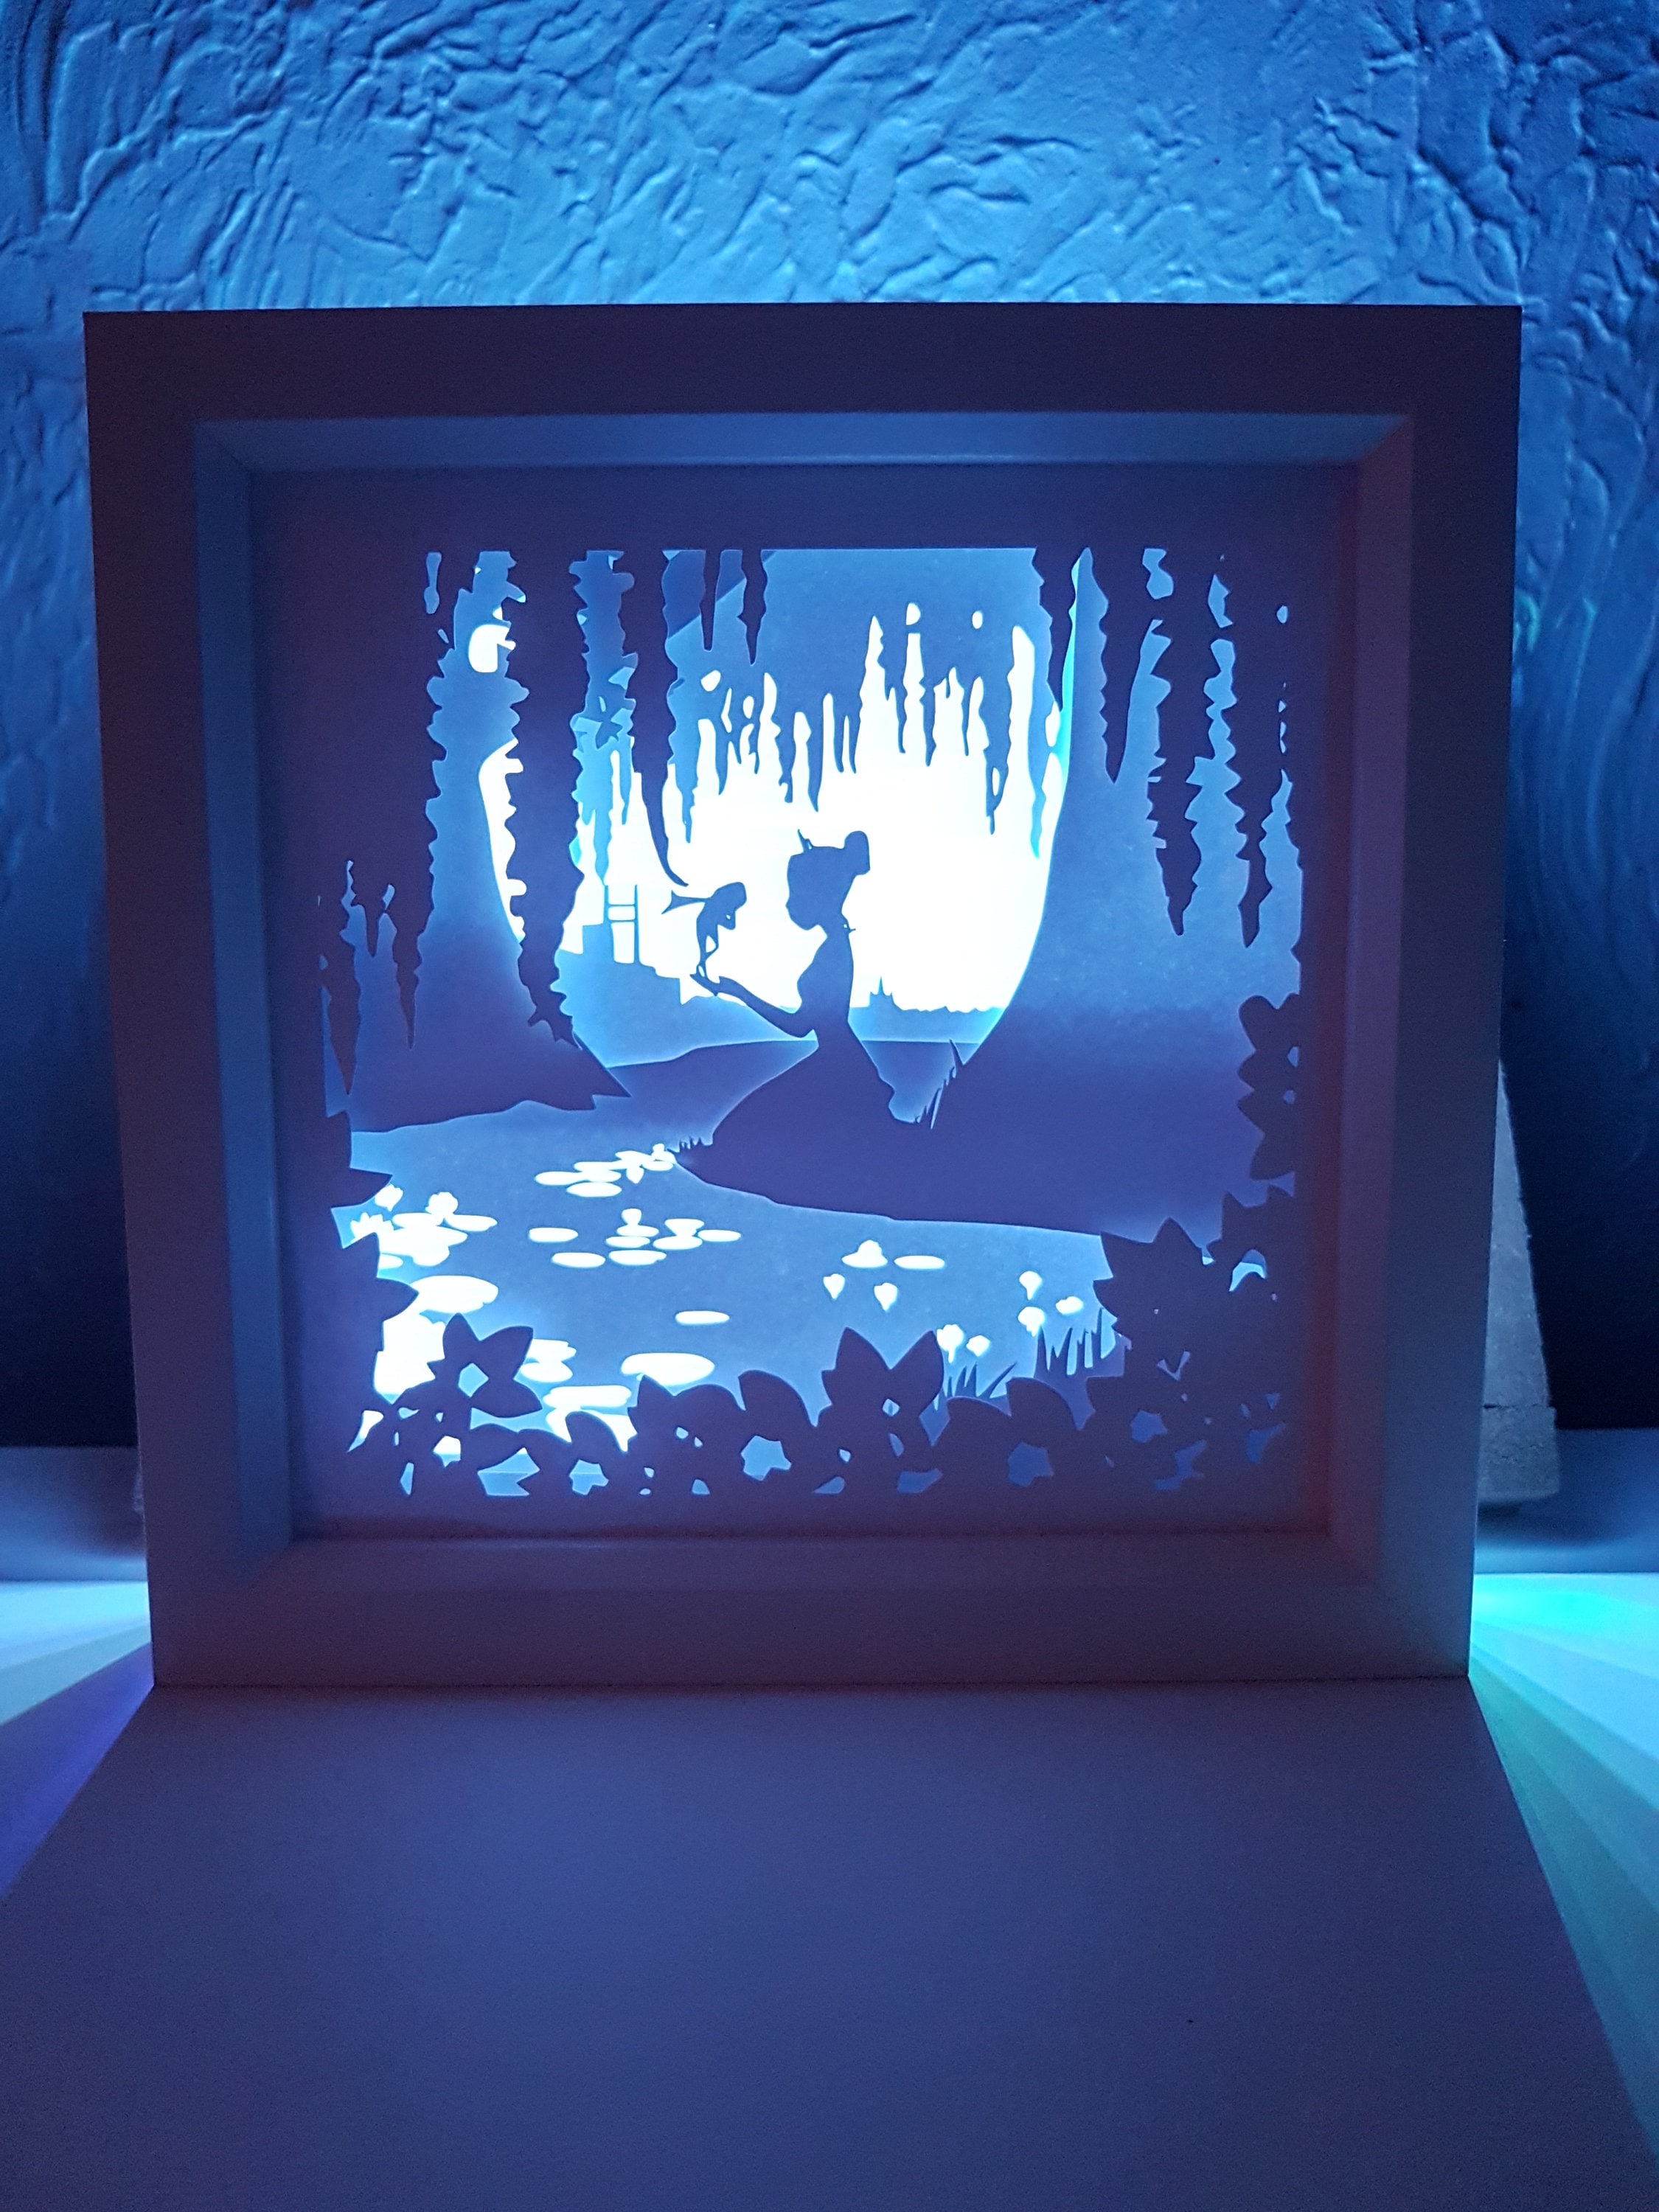 372+ disney shadow box svg free - Download Free SVG Cut Files and